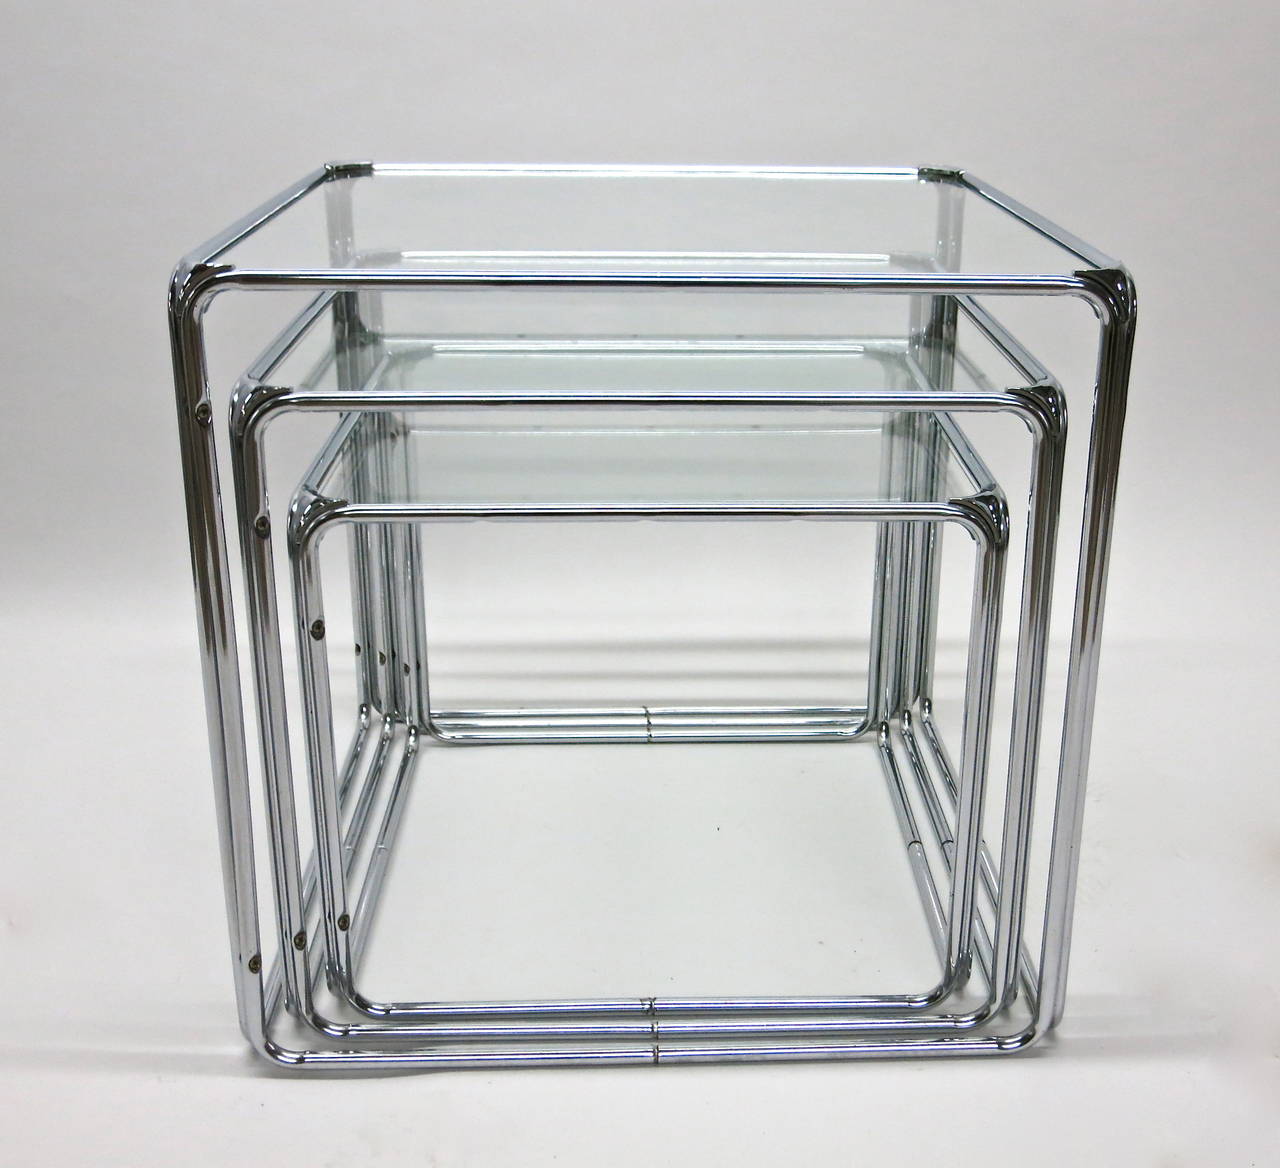 Three stacking tables all cubes with chrome-plated tubular steel frames. Each corner has a triangle joint that connects the frame and covers the fittings. All three tables have a glass top and stack small to large over the top.